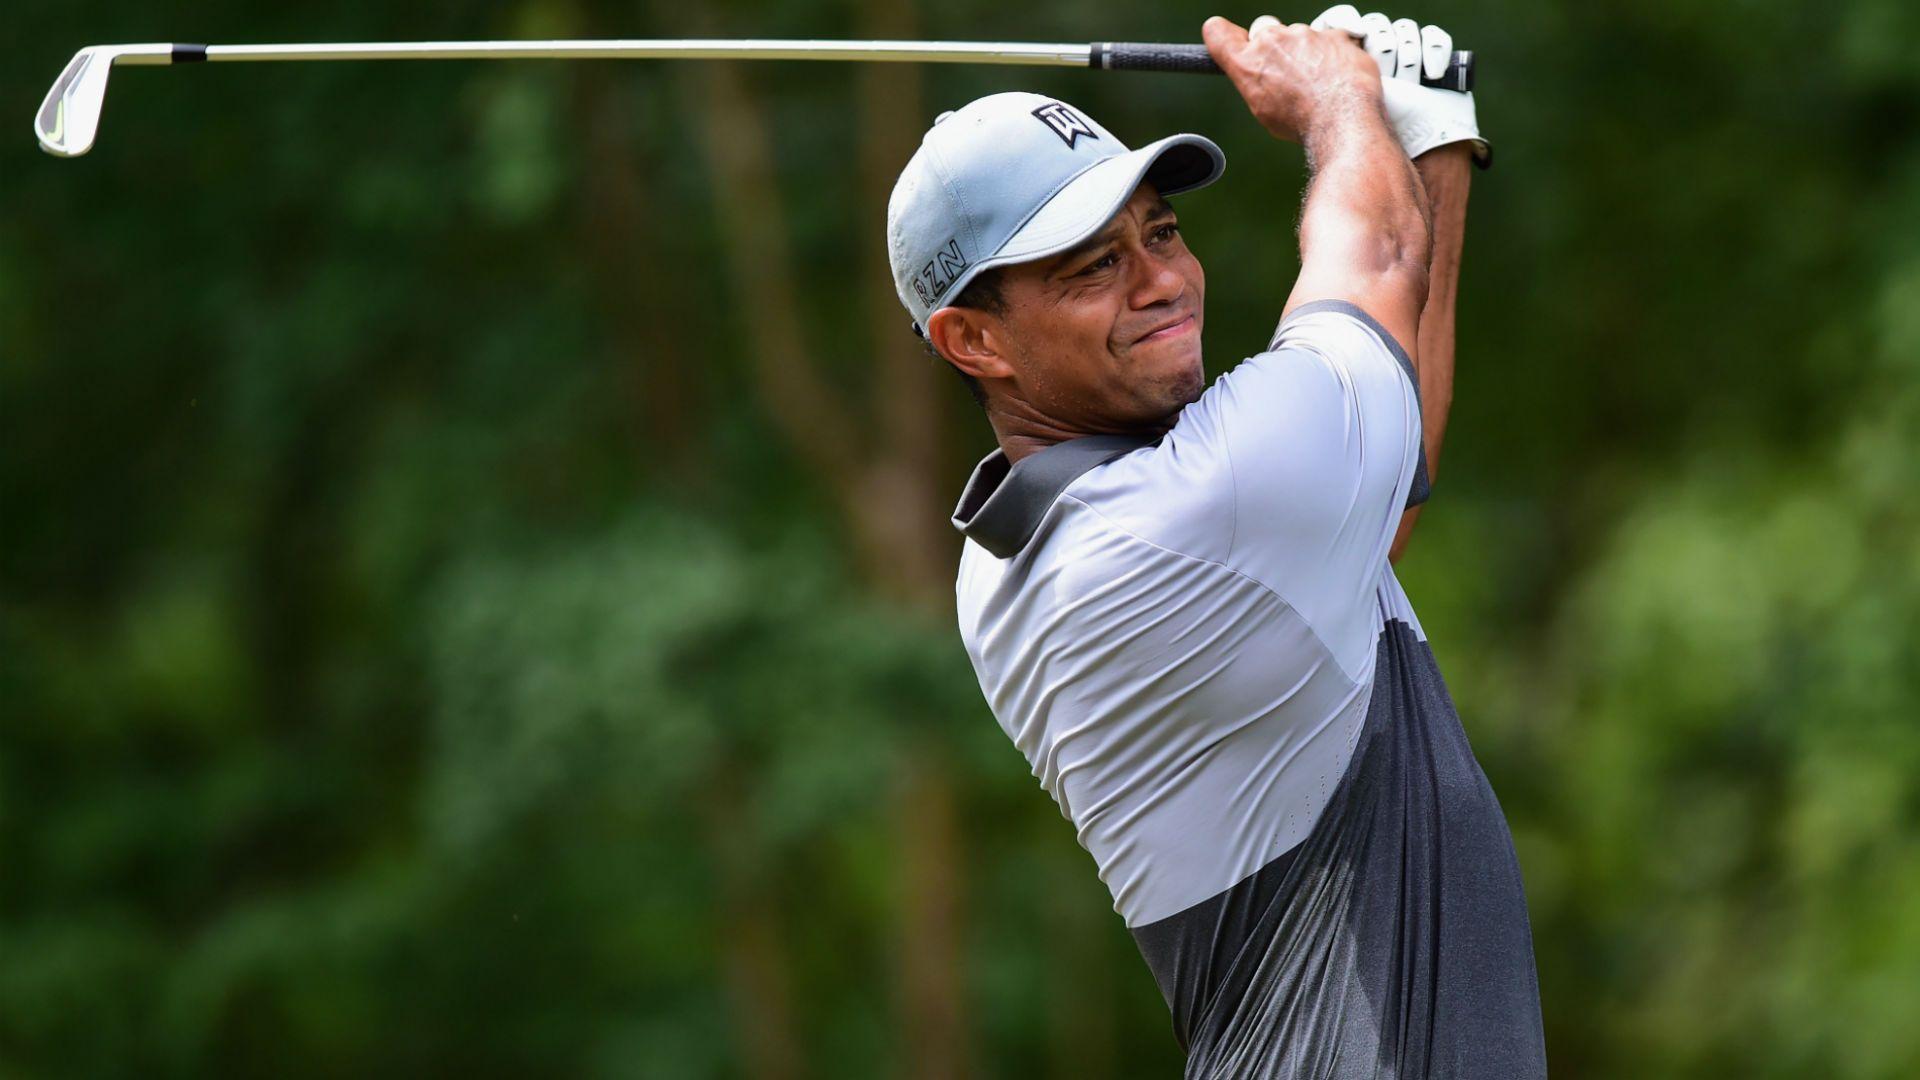 Tiger Woods 50 Top Best Photo And Full HD wallpaper